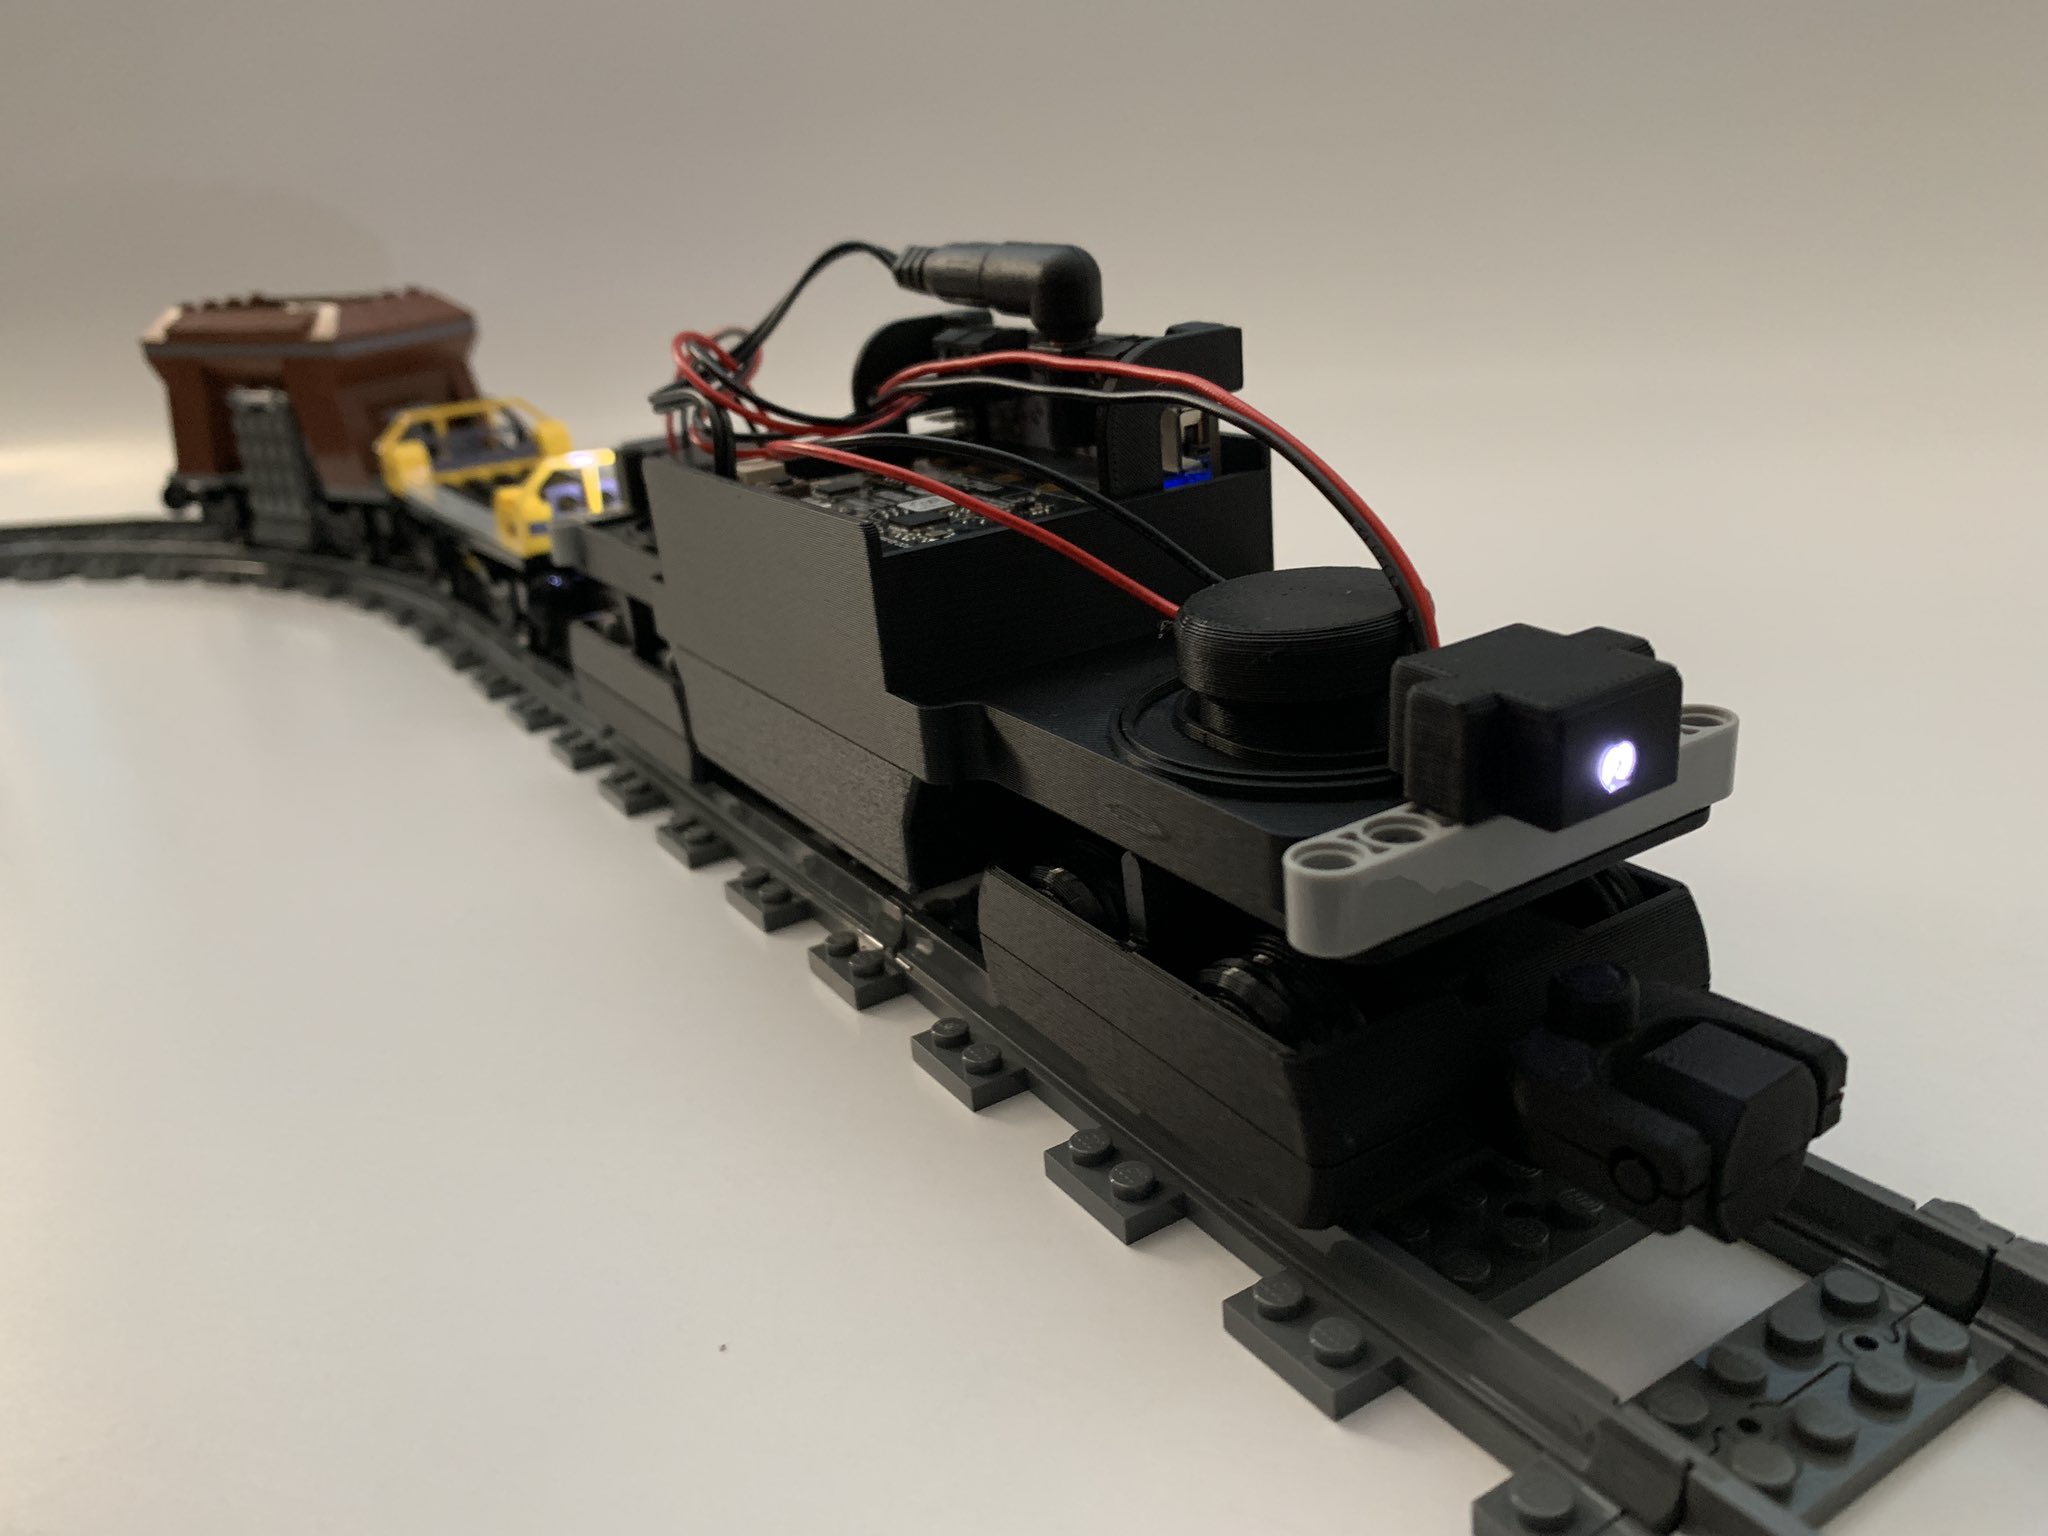 hummingworks on Twitter: "#Lego compatible train powered by Valenta Zero #microbit robotics controller! Capable of mounting Lego brick bodies and controlling via iPad! See LED lights ;-) More coming soon!